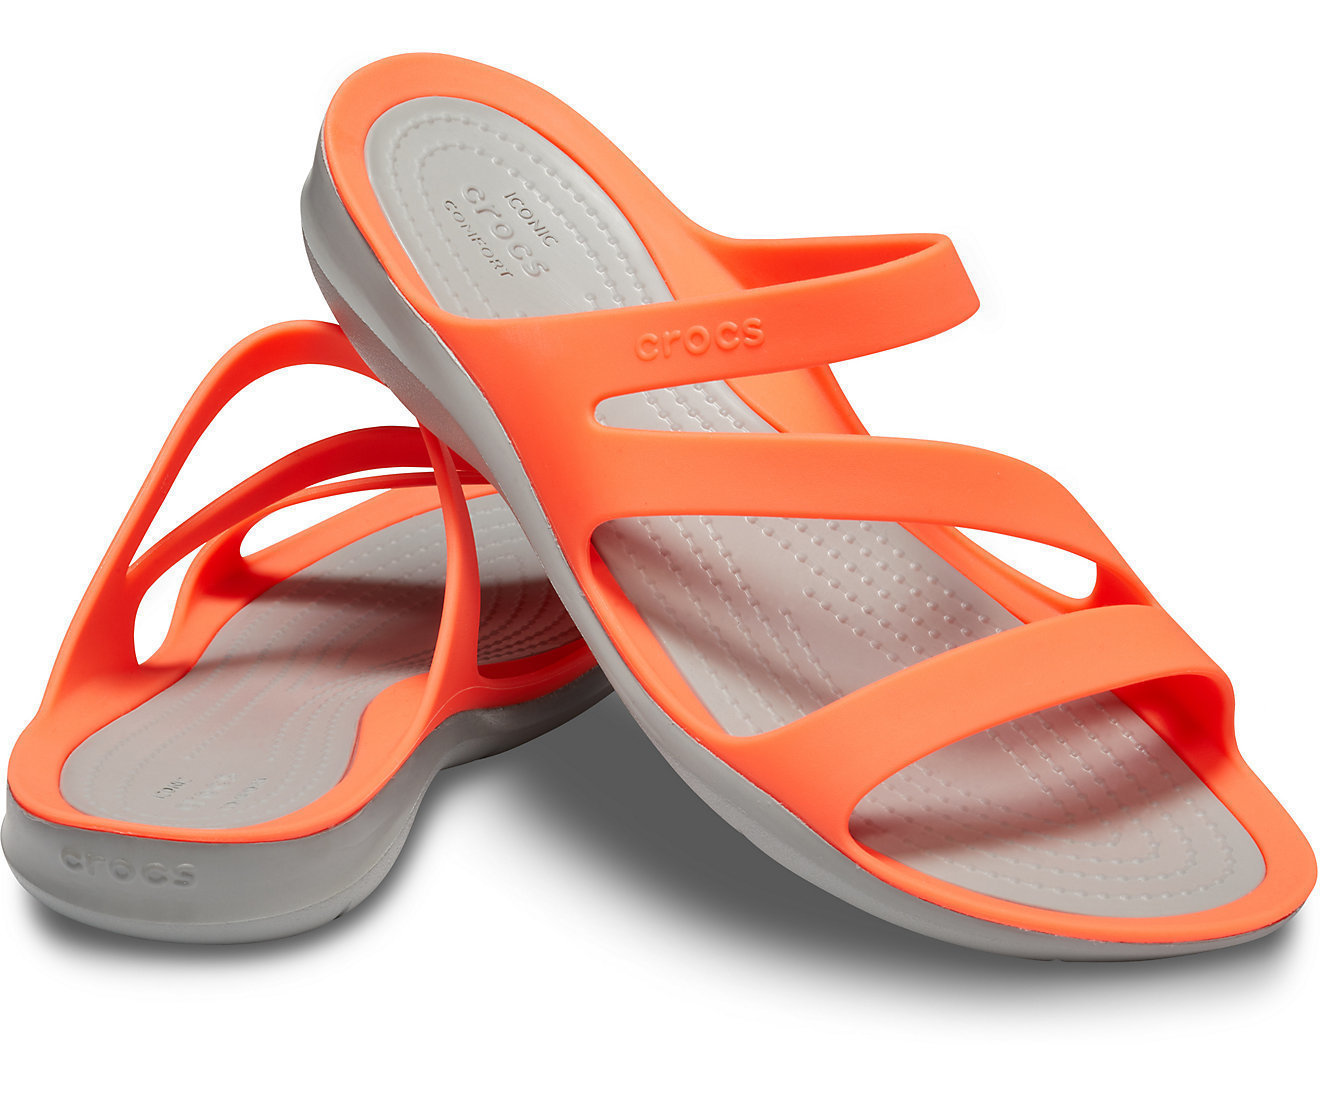 Womens Sailing Shoes Crocs Women's Swiftwater Sandal Bright Coral/Light Grey 41-42